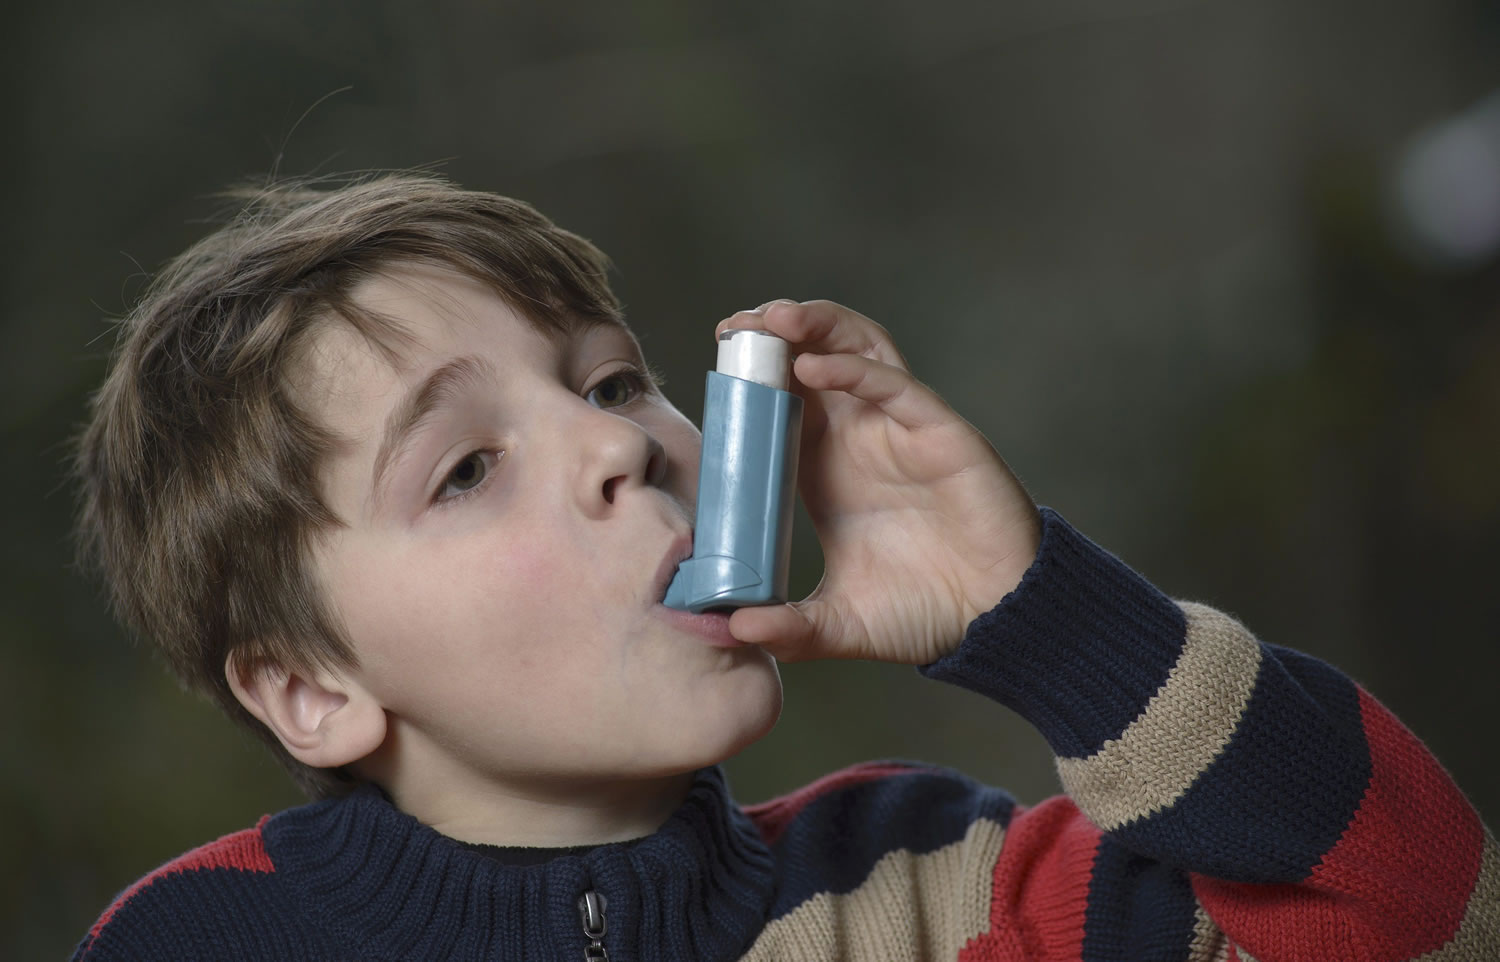 Mayo Clinic researchers recently linked asthma in childhood with an increased risk of shingles.